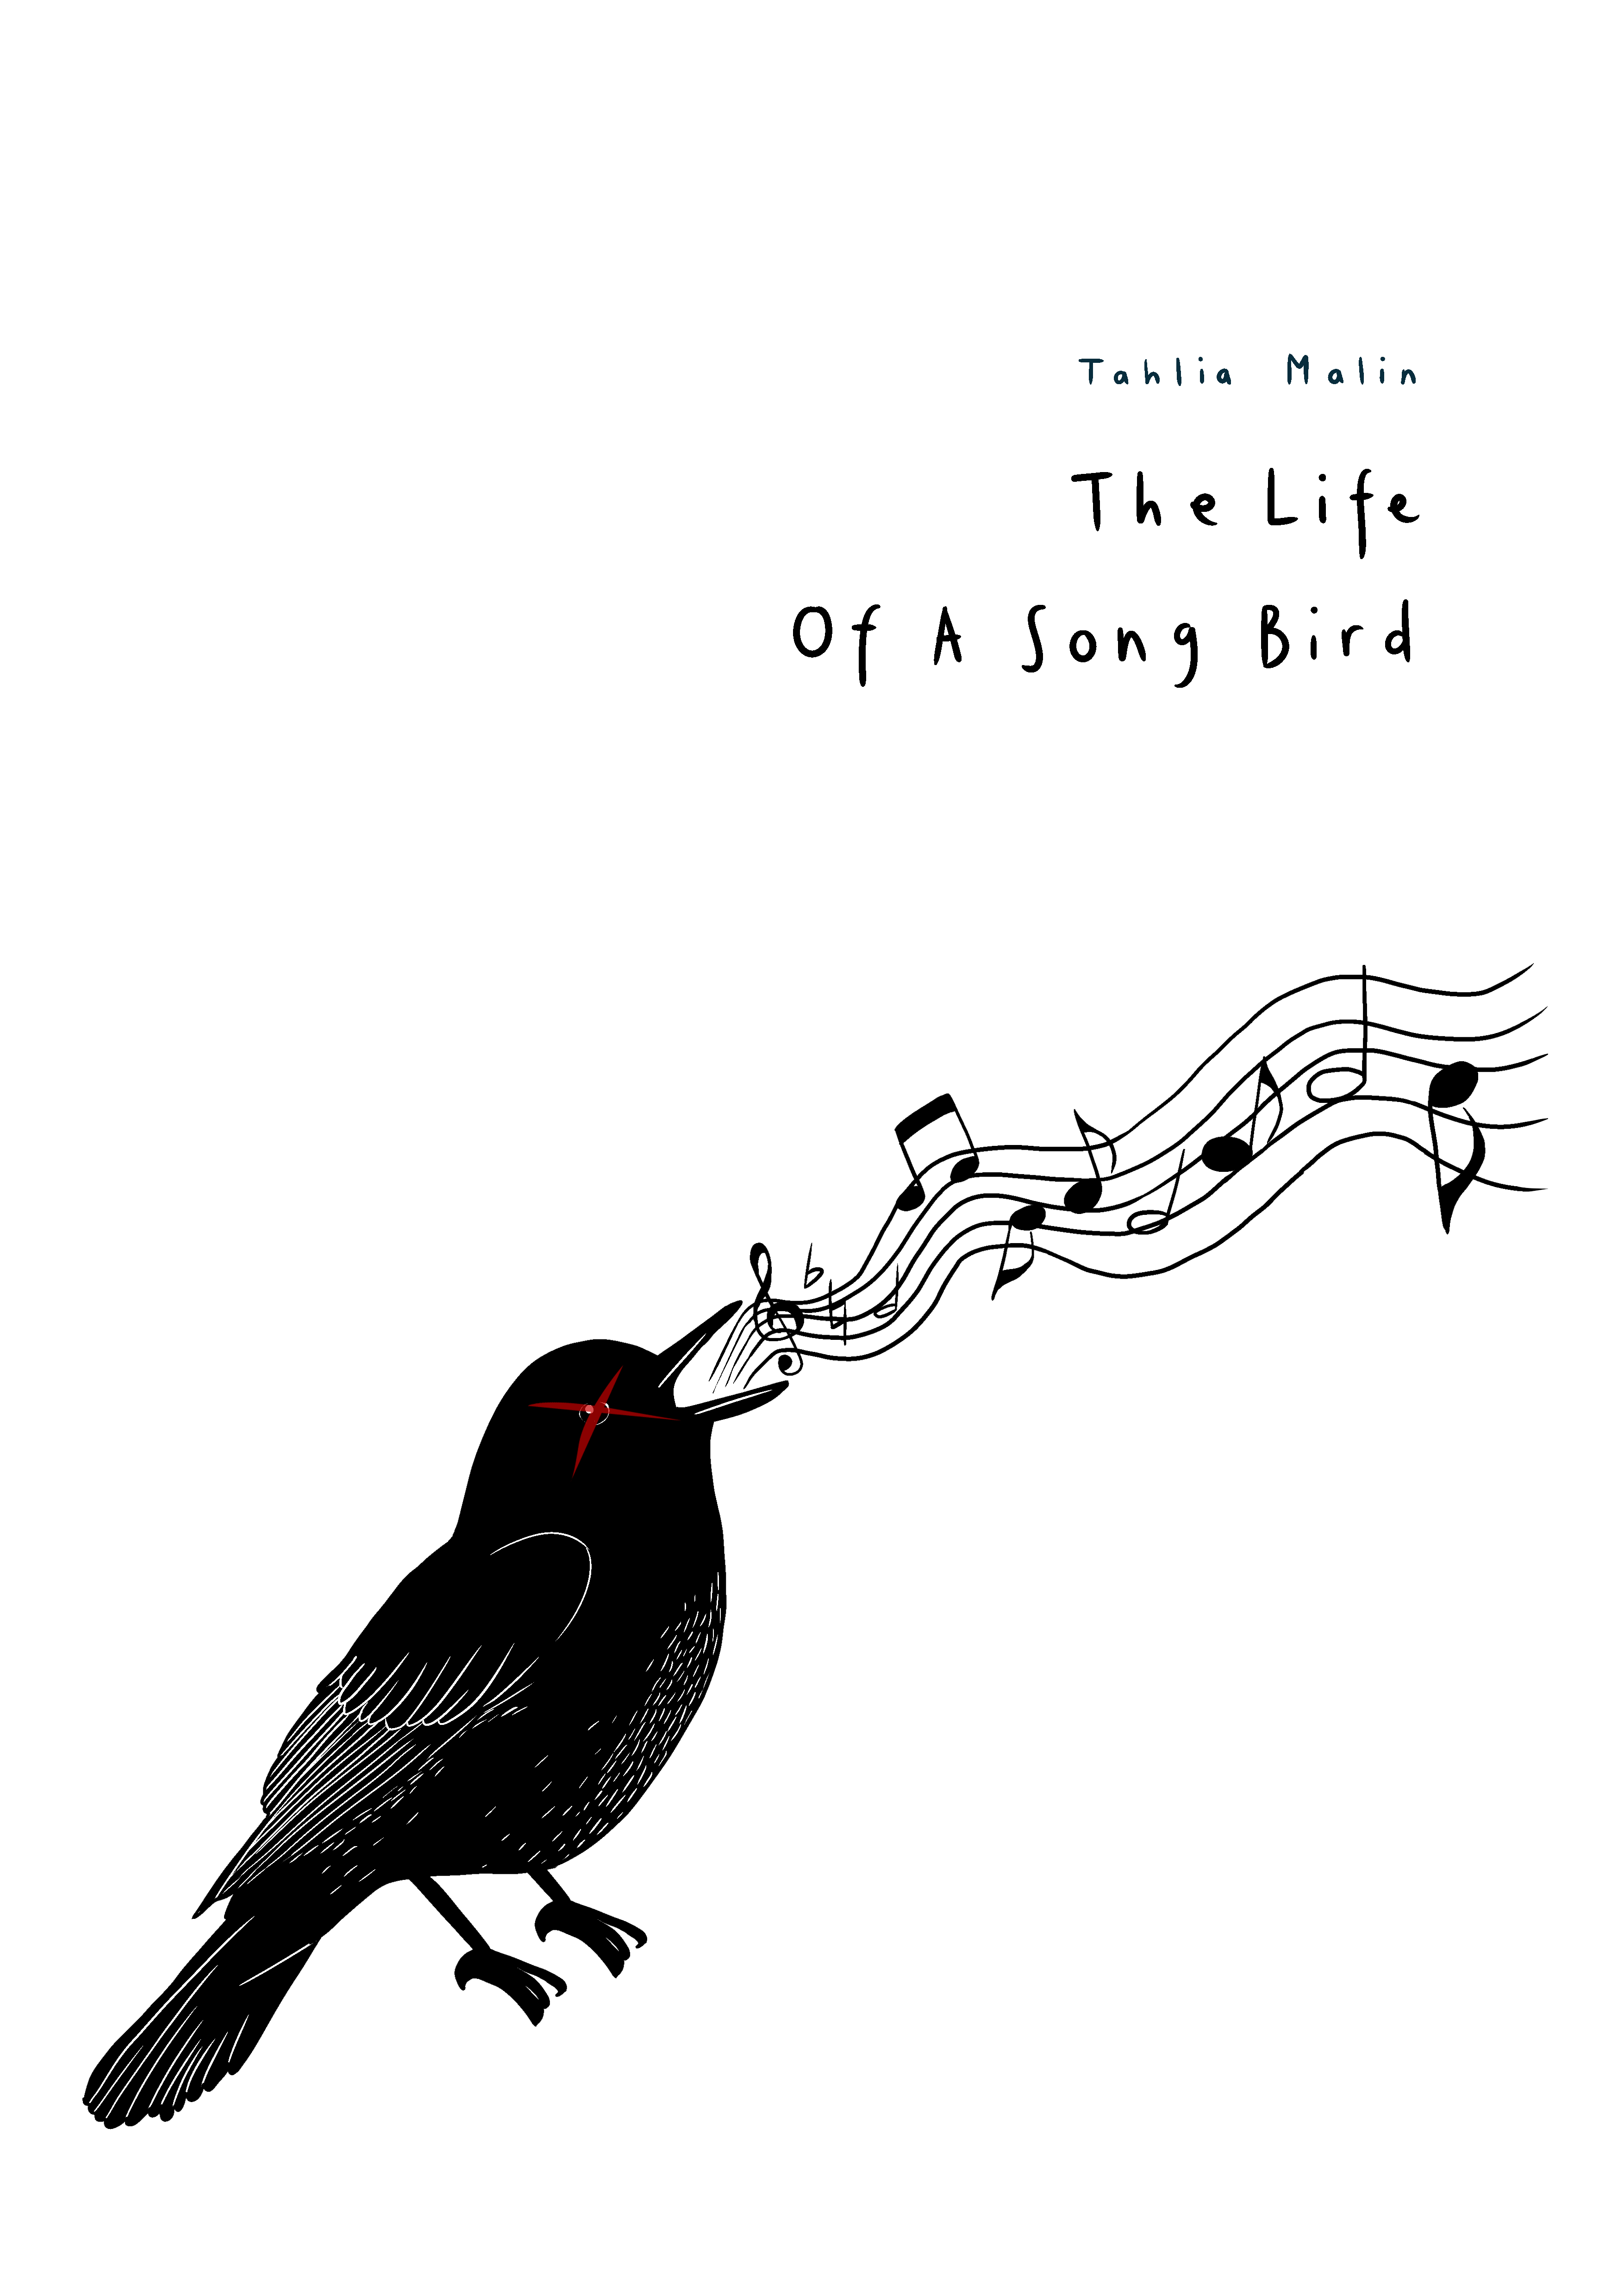 FREE: The Life of a Songbird by Tahlia Malin